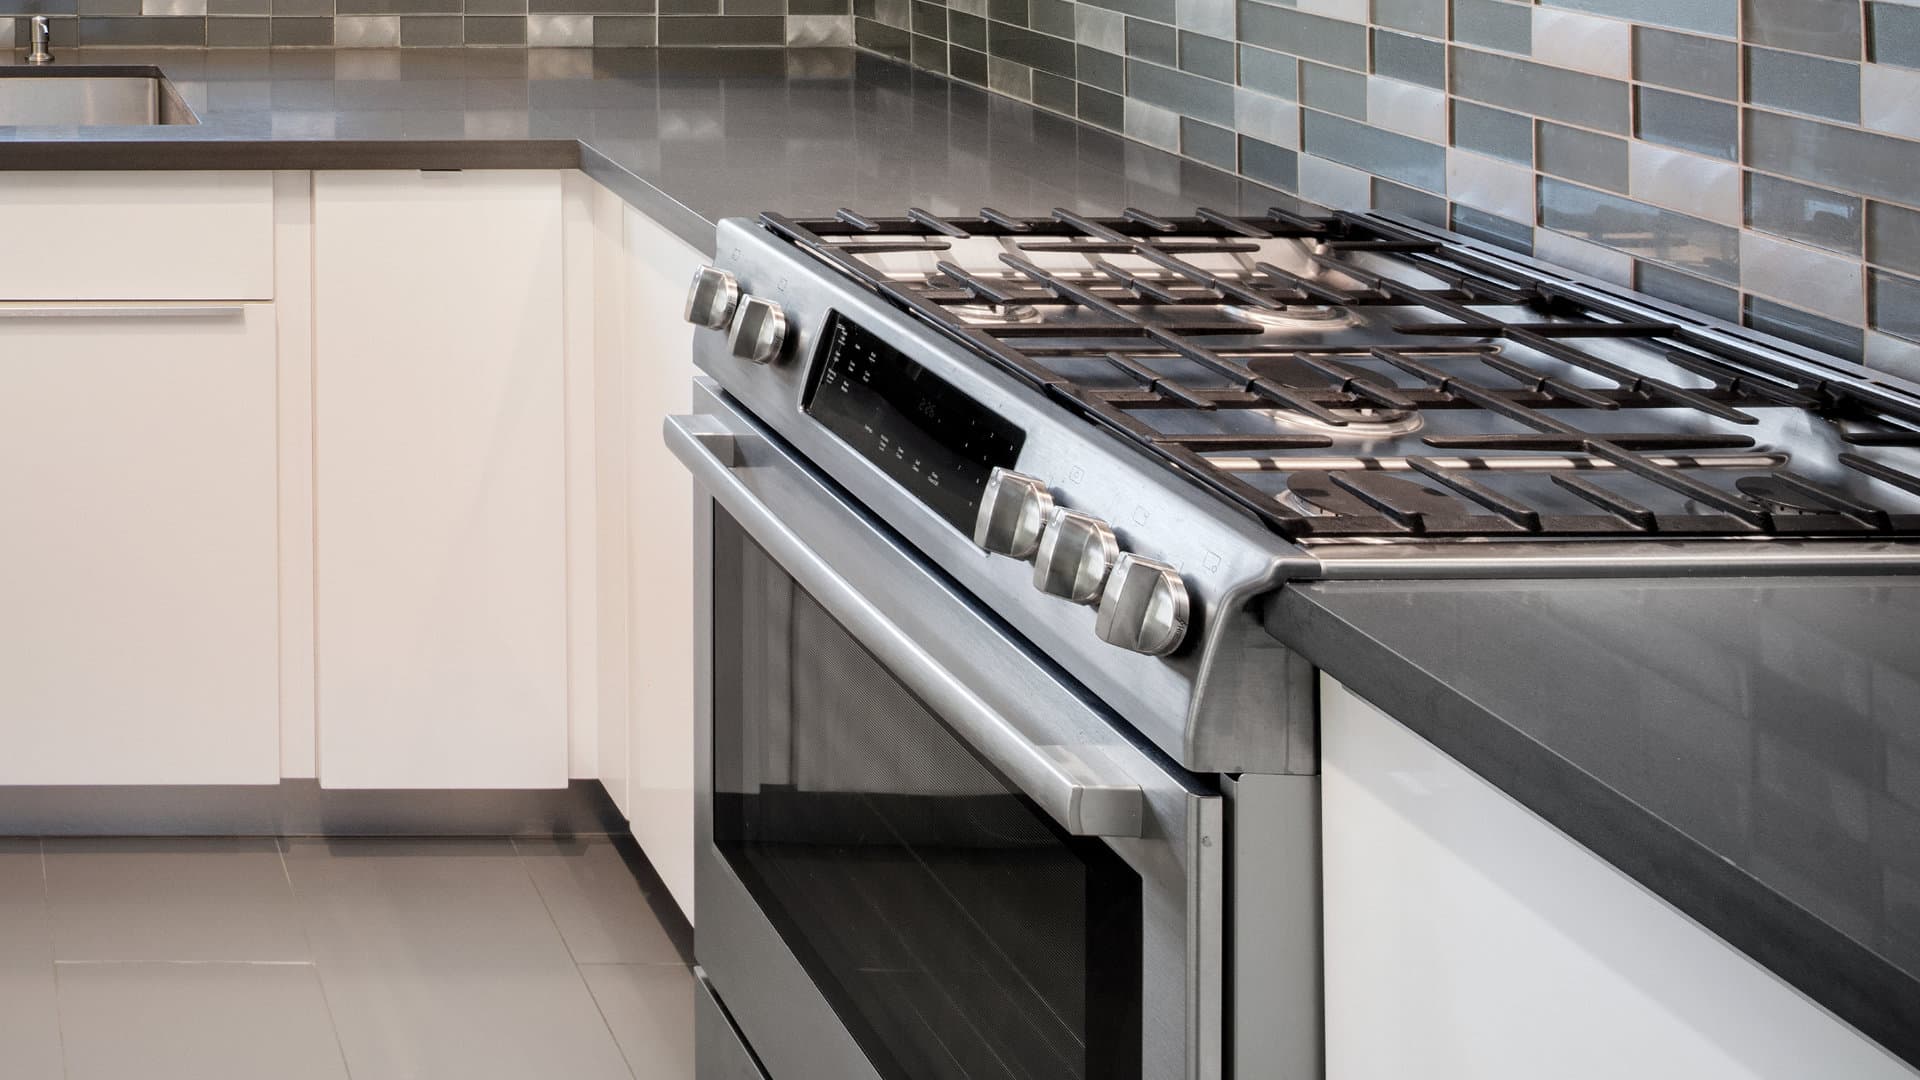 Featured image for “5 Dangers of Self-Cleaning Ovens”